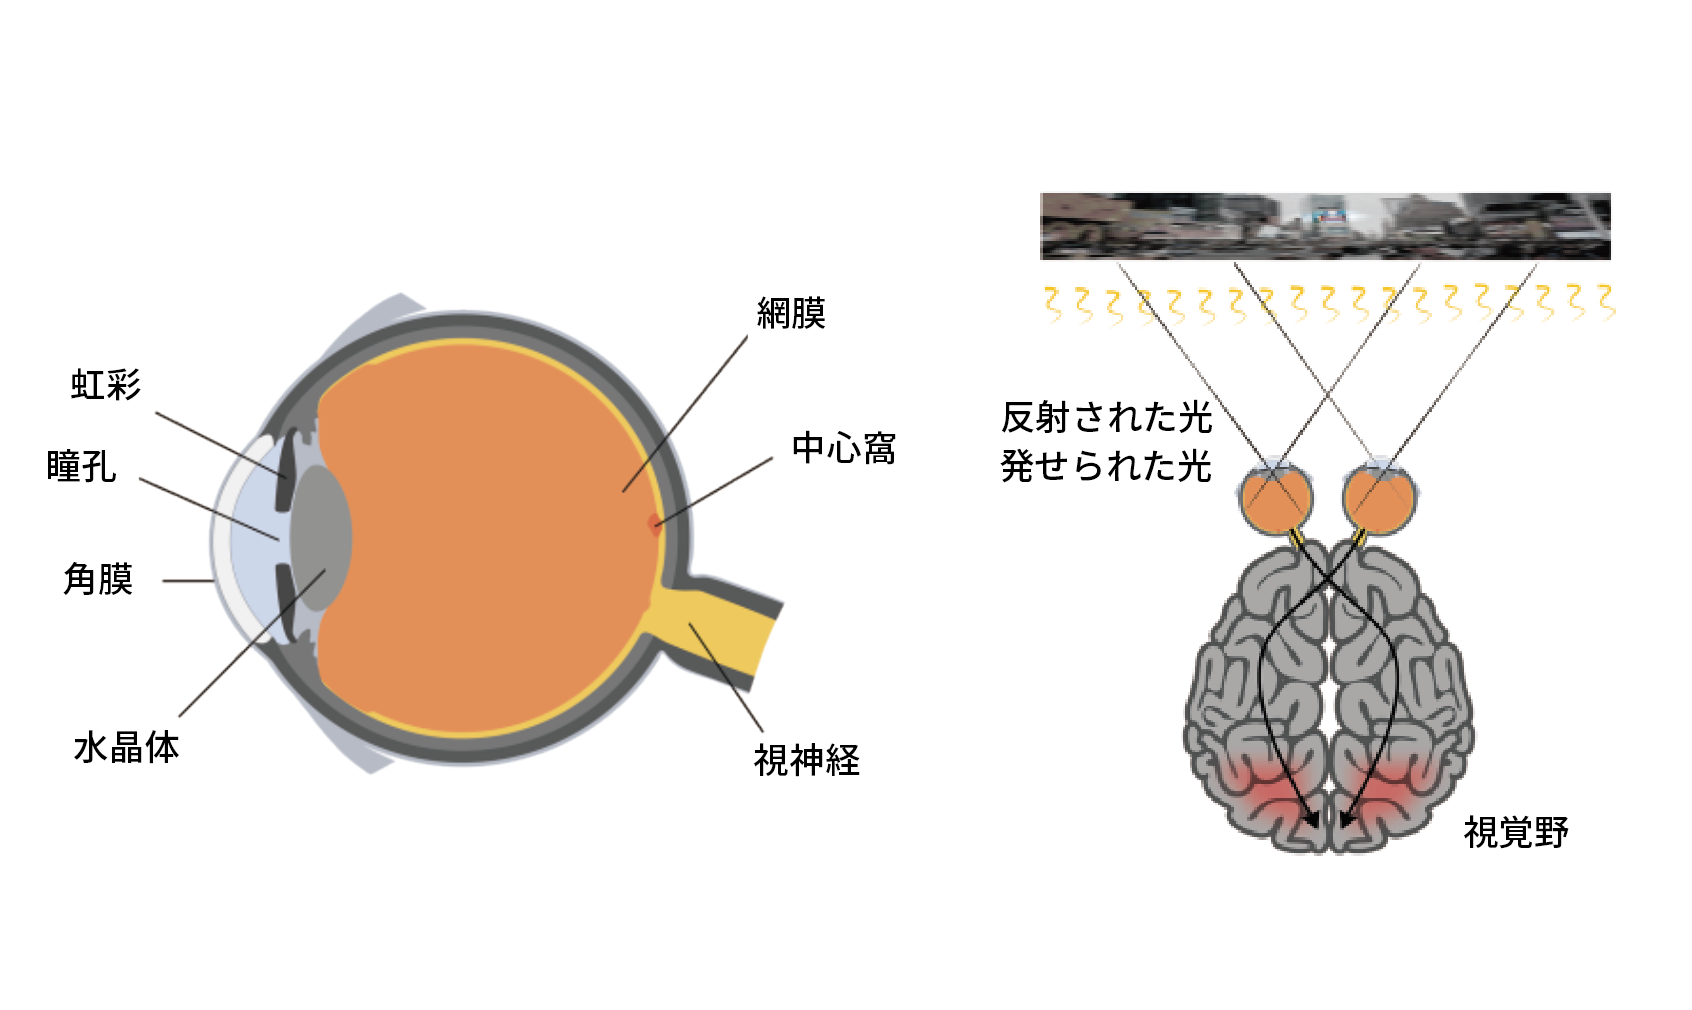 Structural diagram of the human eye and image of its transmission to the visual cortex of the brain